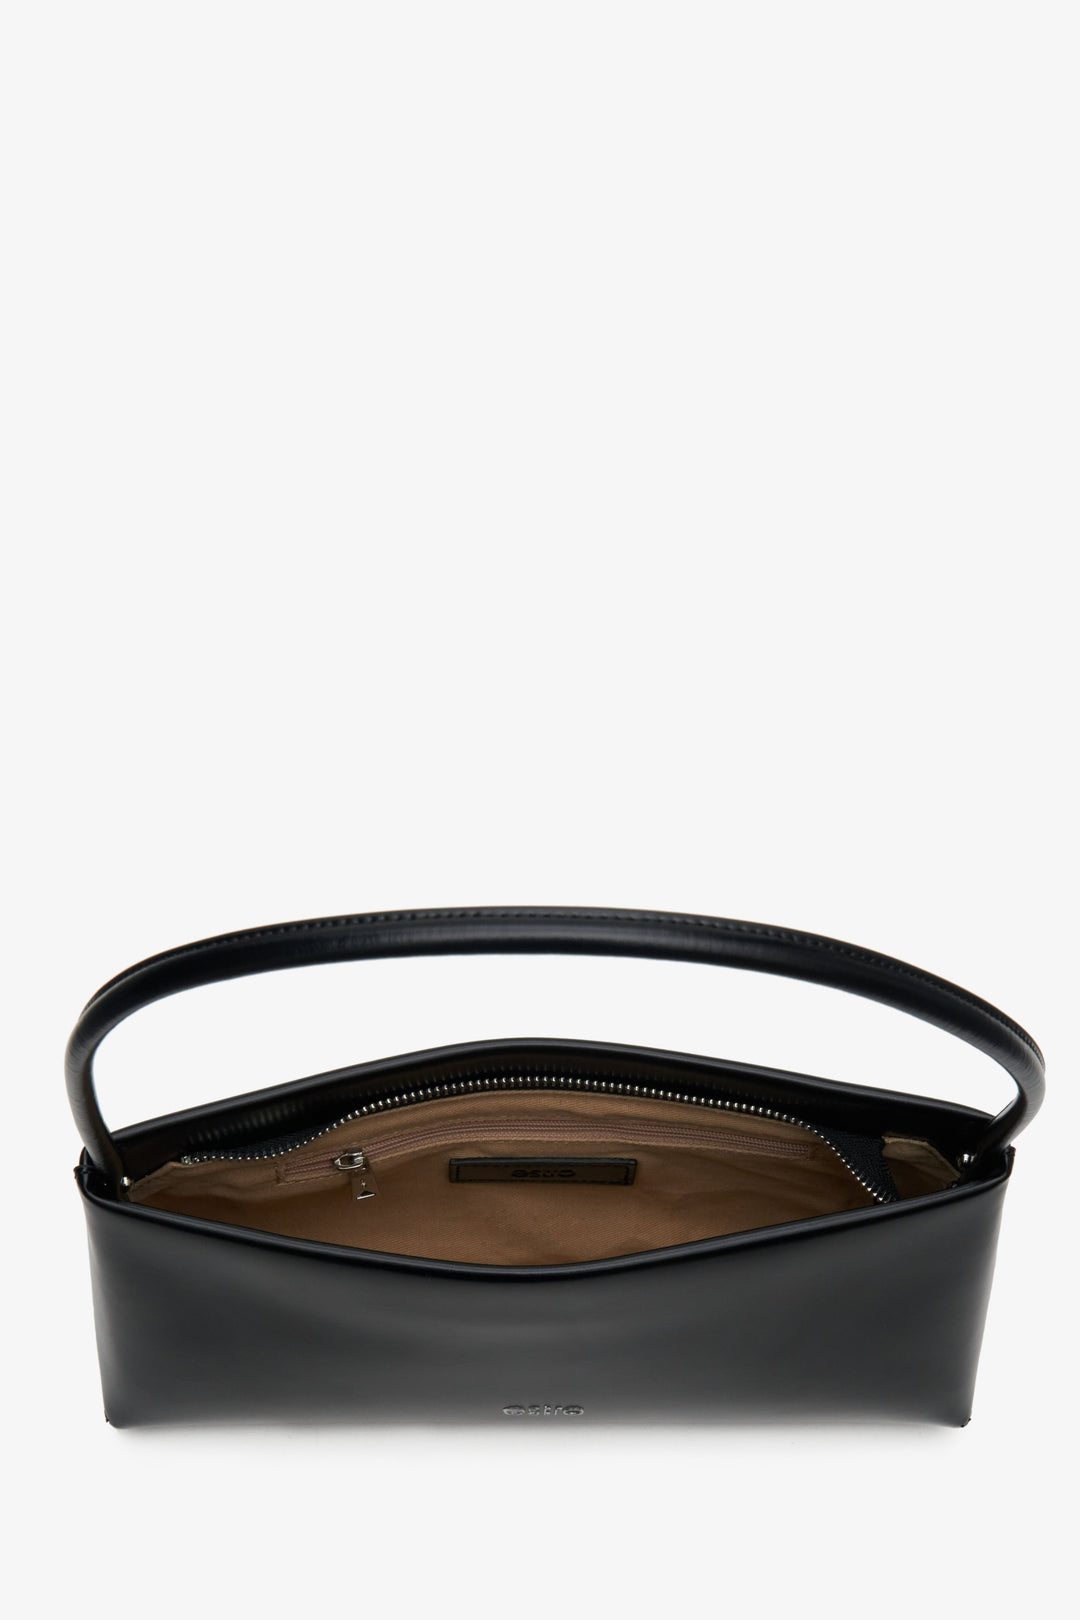 Women's black leather handy bag - presentation of the main compartment.